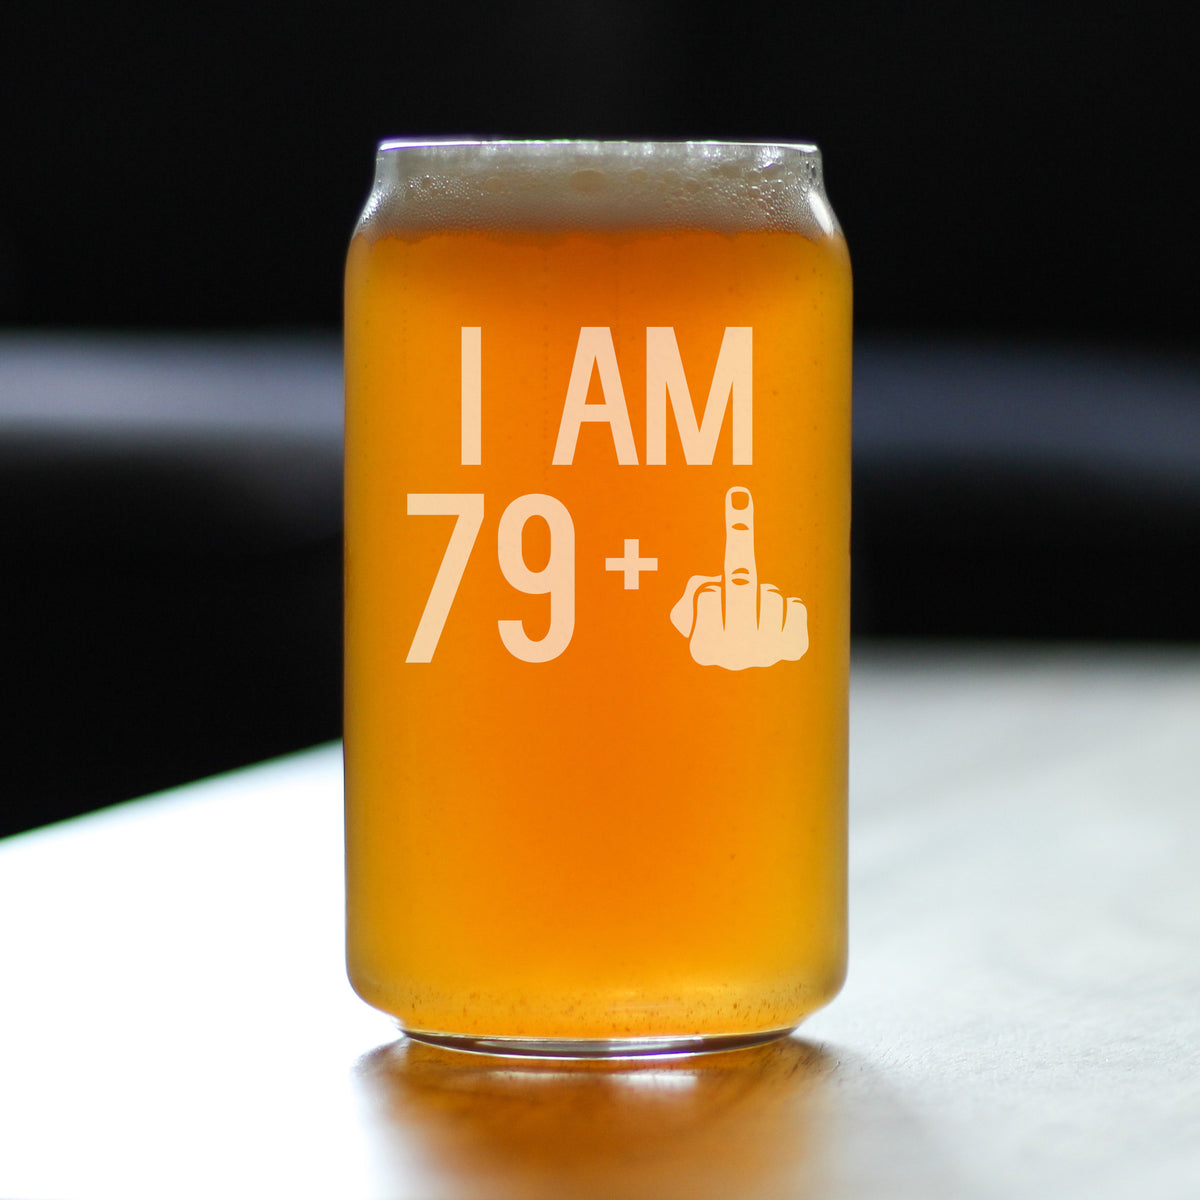 I Am 79 + 1 Middle Finger - 16 oz Beer Can Pint Glass - Funny 80th Birthday Gifts for Men or Women Turning 80